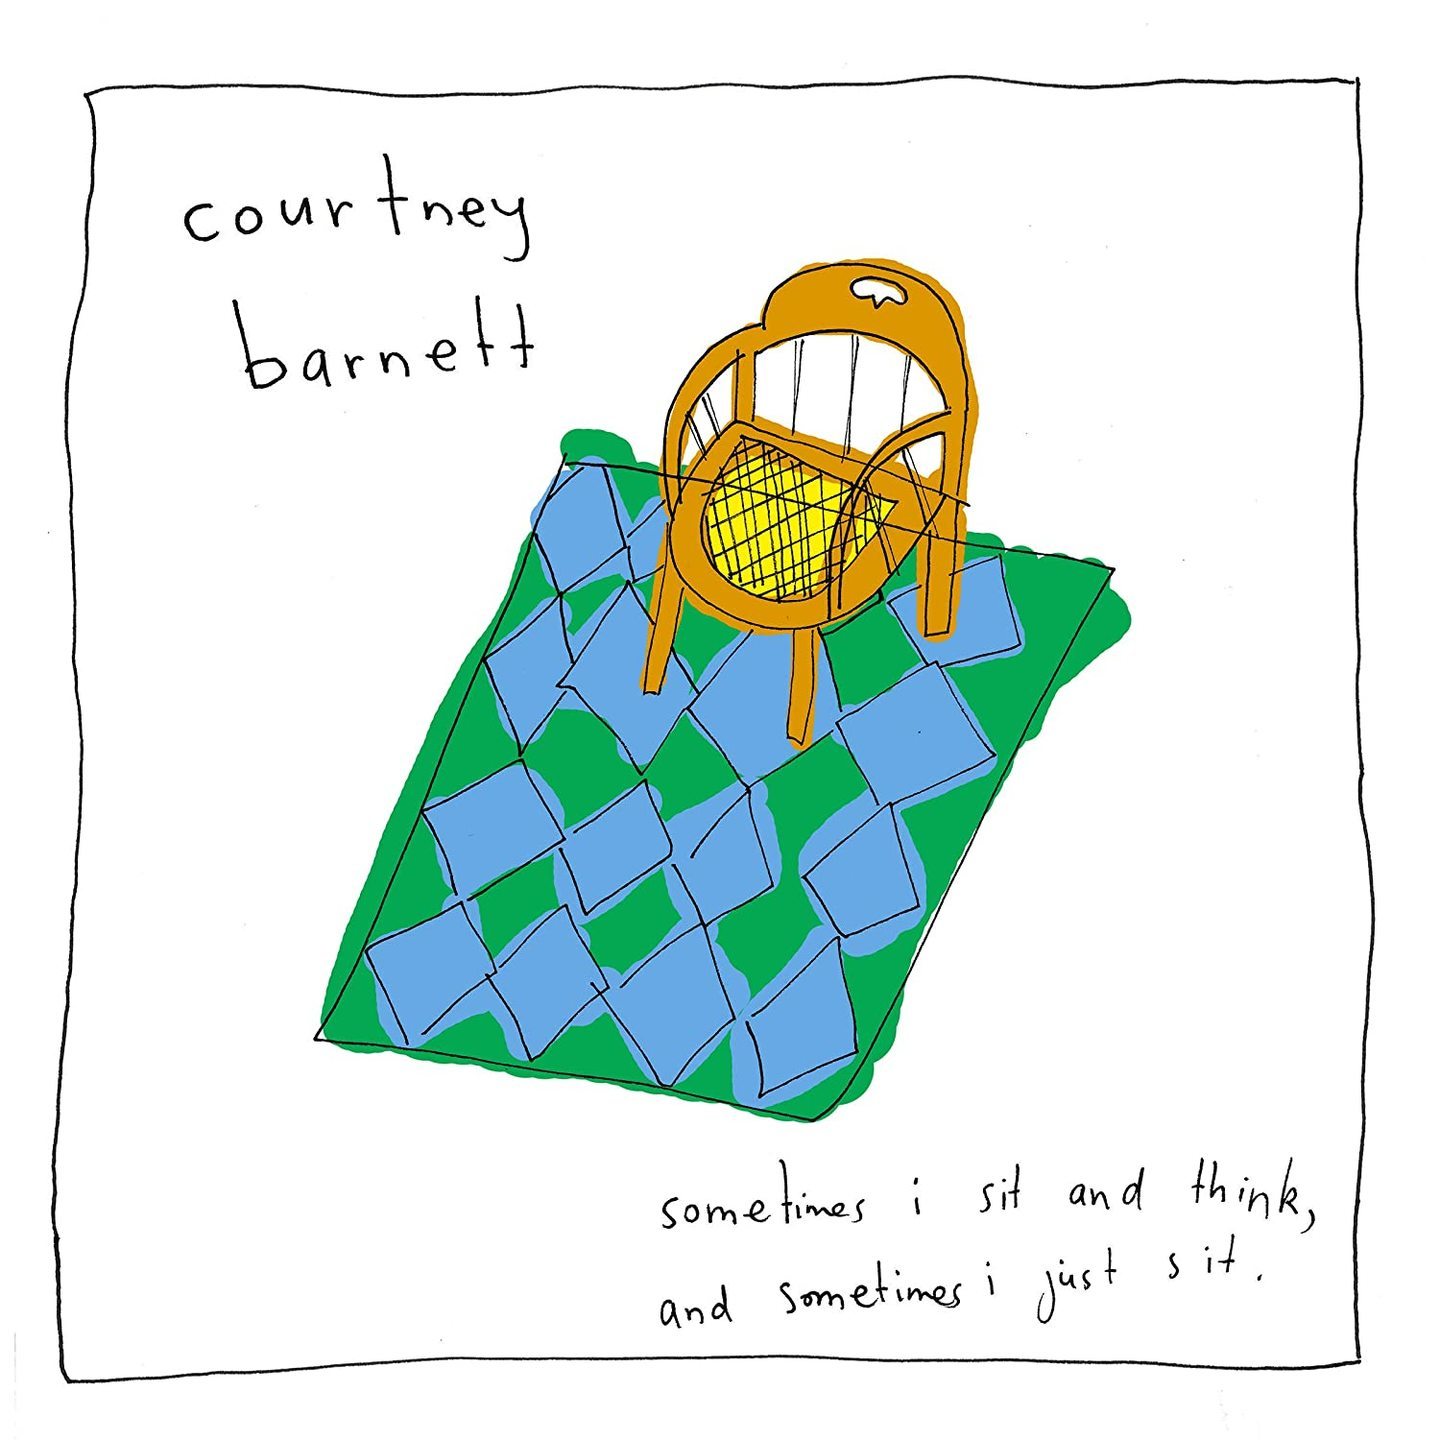 COURTNEY BARNETT - Sometimes I Sit And Think, And Sometimes I Just Sit LP